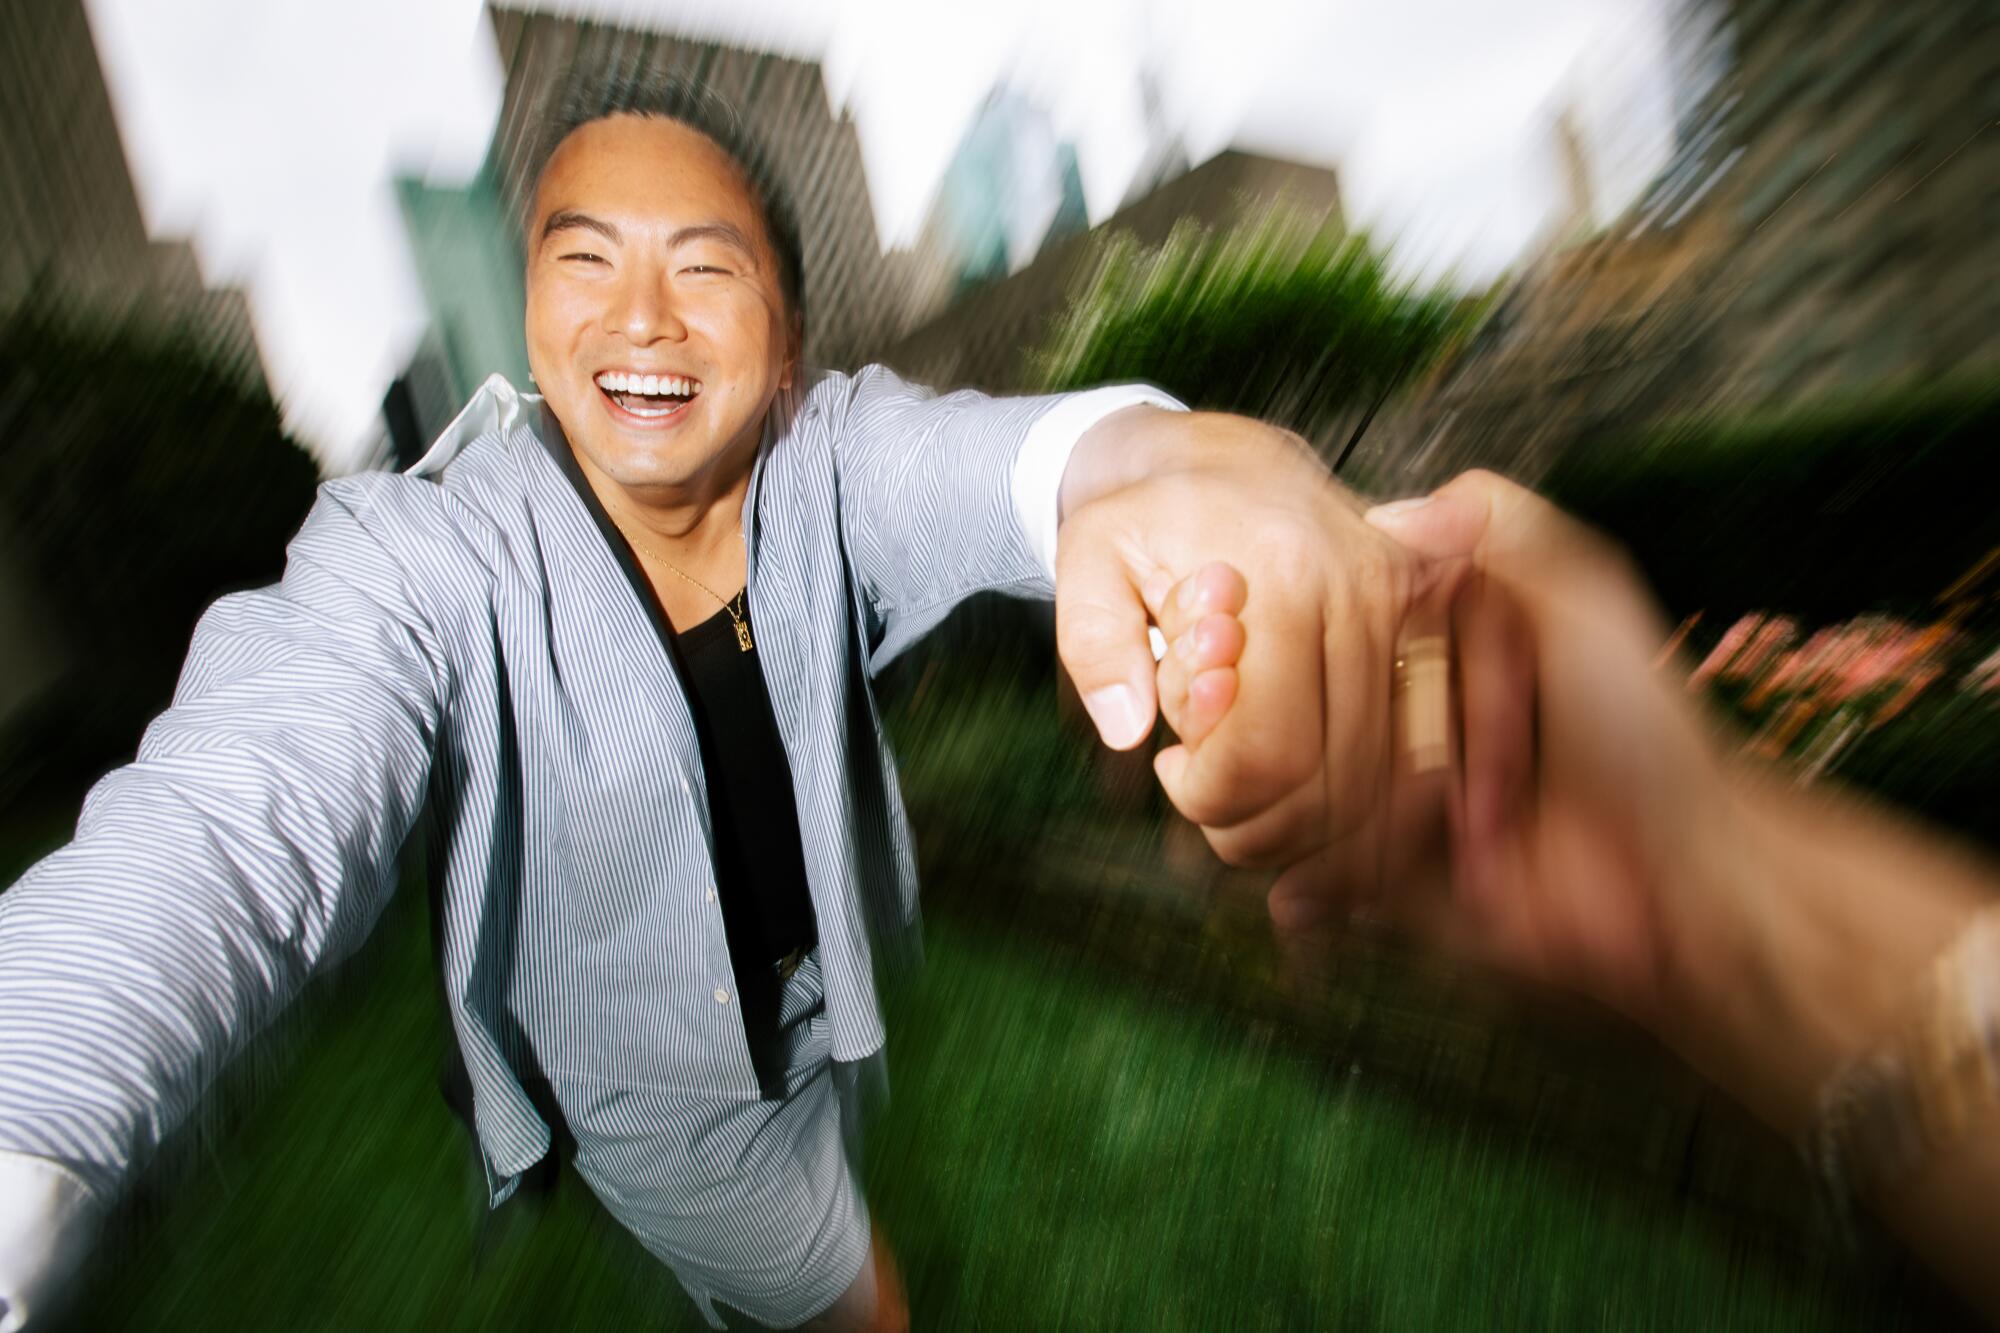 A man laughs as he swirls against a blurred background.